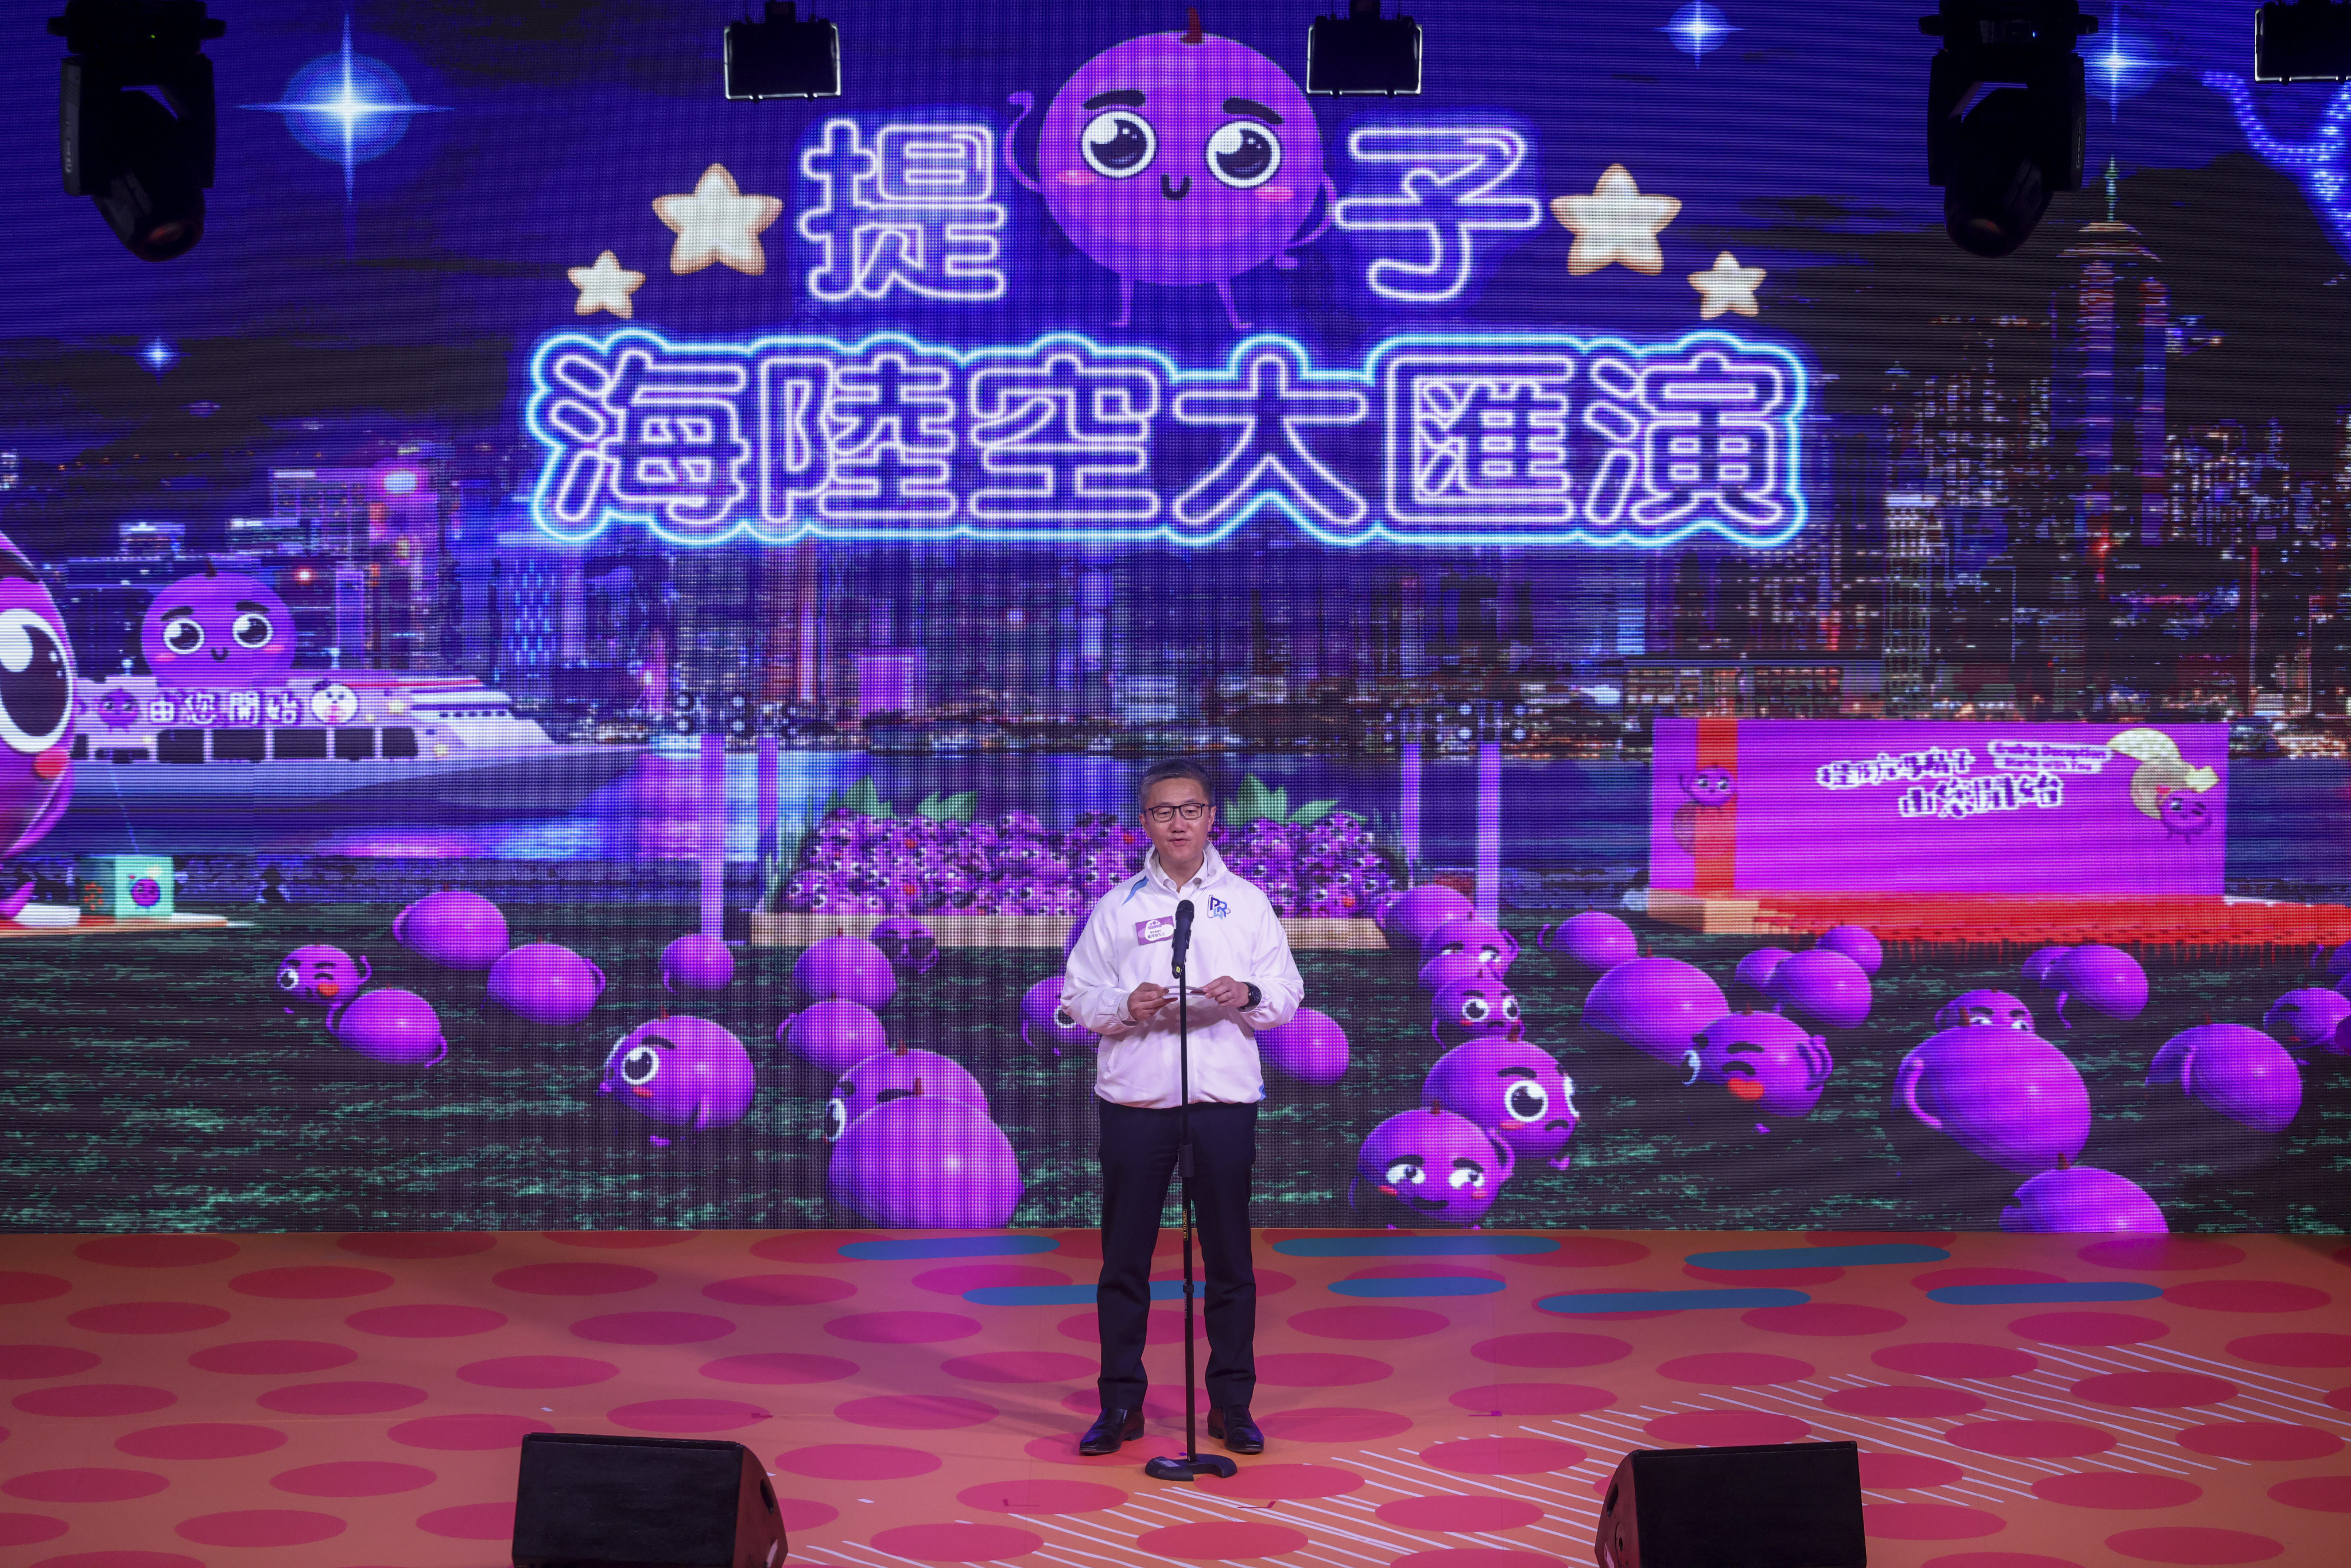 Commissioner of Police Raymond Siu Chak-yee attended the police anti-fraud campaign at the West Kowloon Cultural District Art Park Waterfront Lawn last month. Photo: Yik Yeung-man